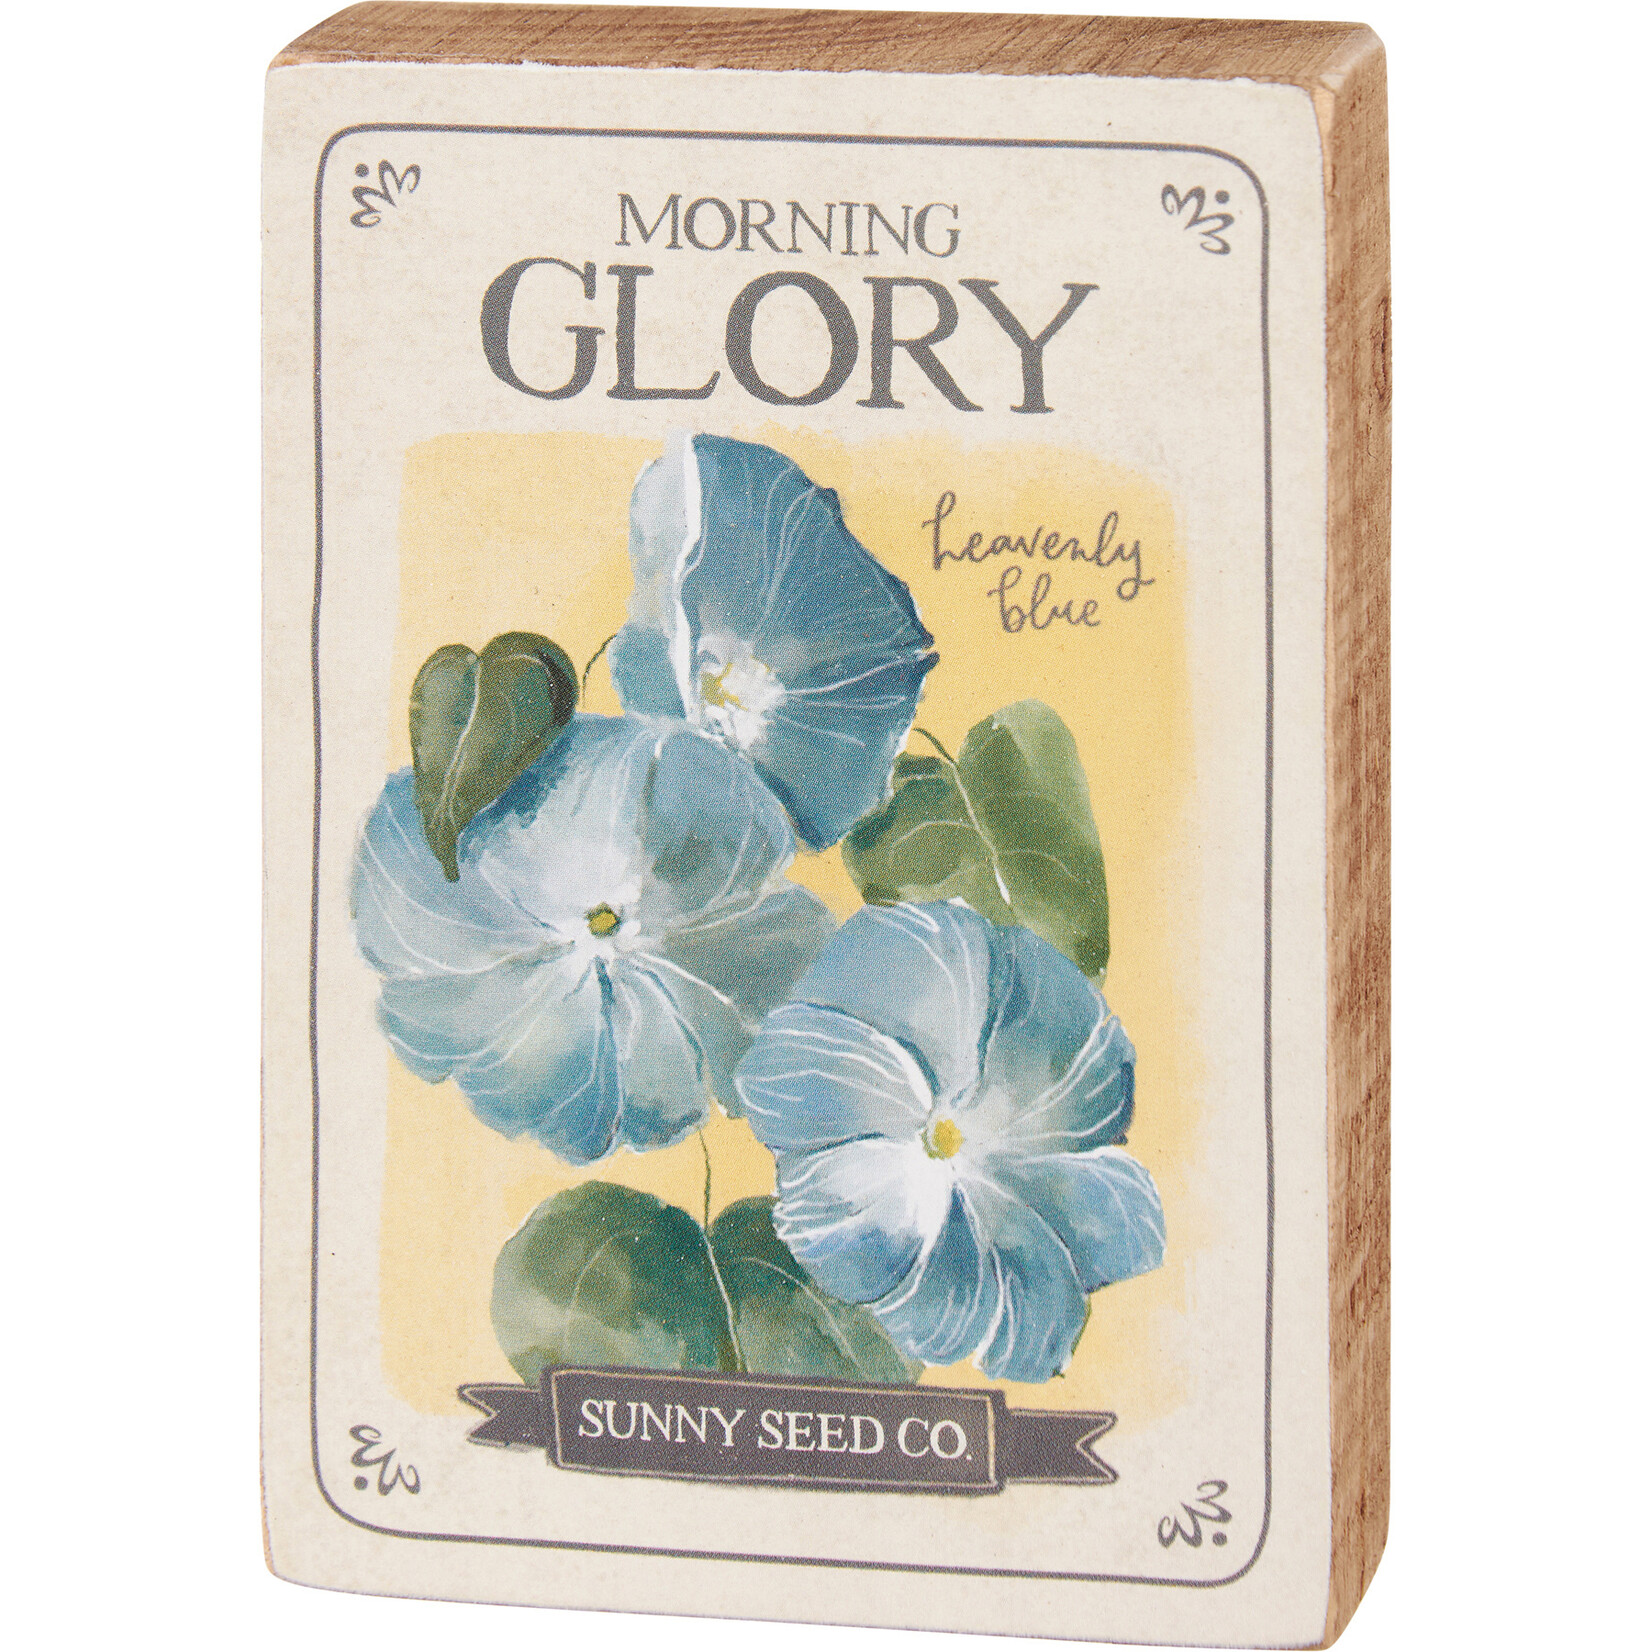 Primitives by Kathy Primitives by Kathy Morning Glory Seed Packet Block Sign